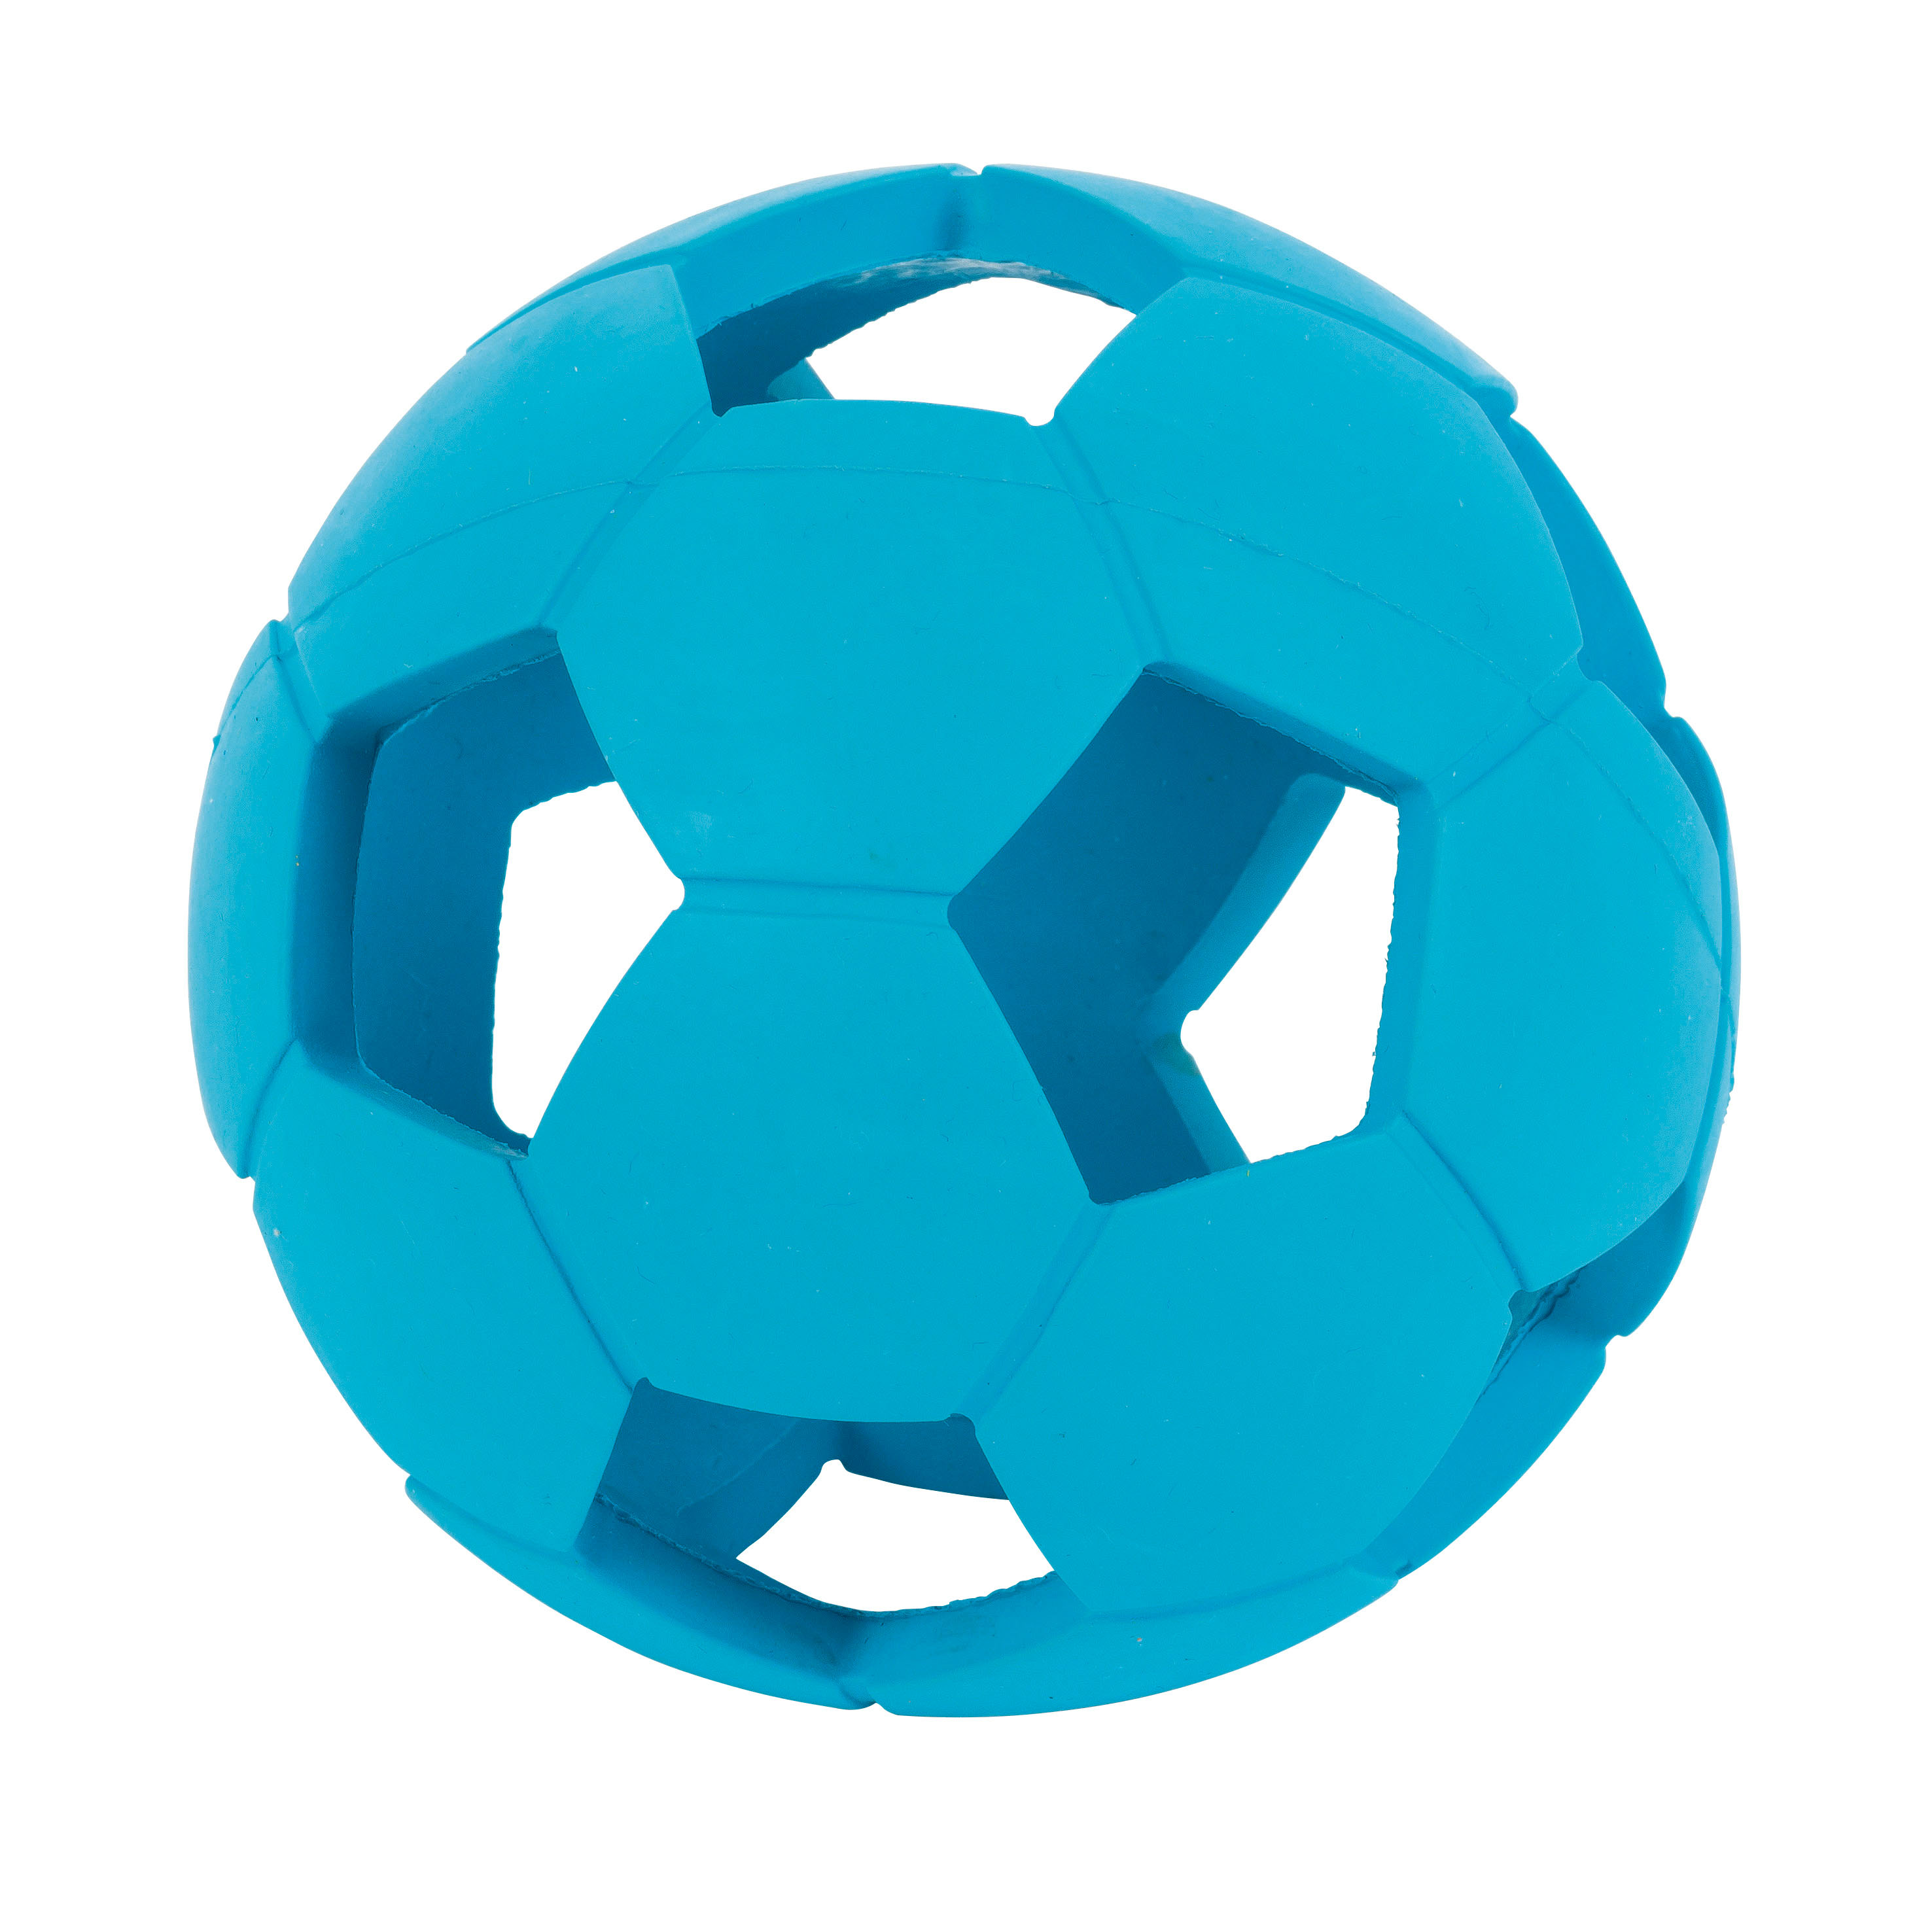 GOOD RUBBER VOETBAL HOL 1ST 11,4x11,4cm